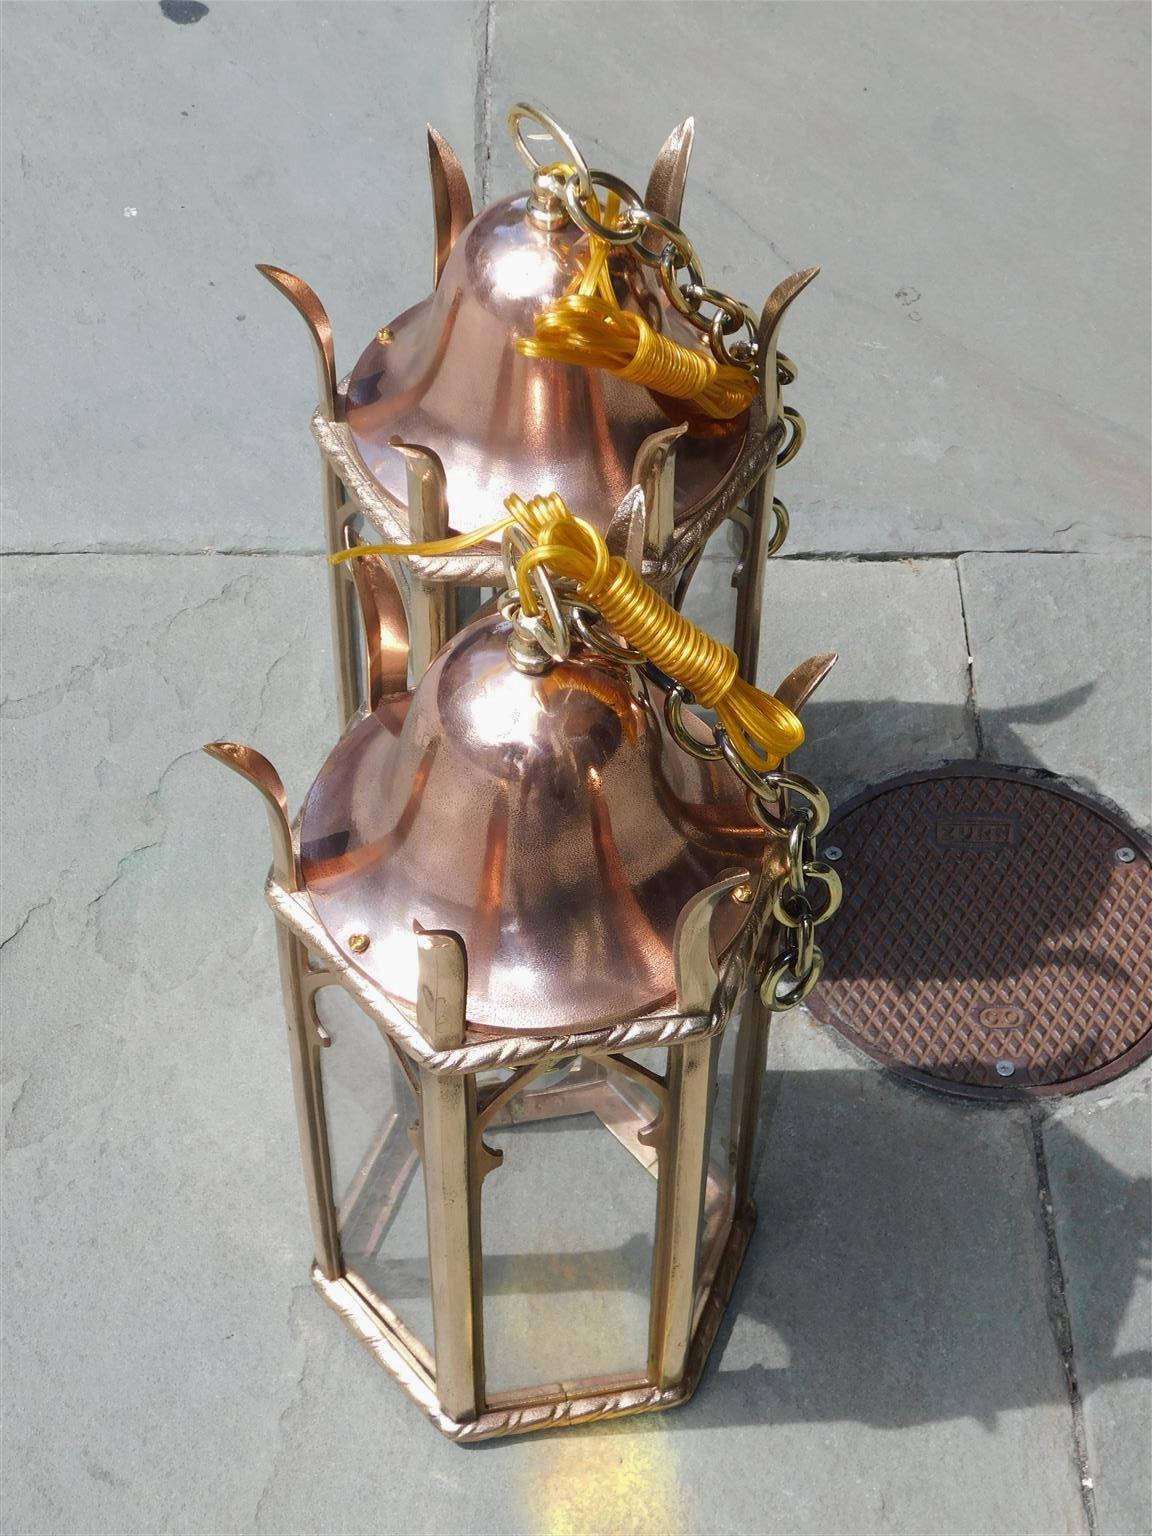 Cast Pair of American Dome Copper and Brass Decorative Hanging Hall Lanterns, C. 1850 For Sale